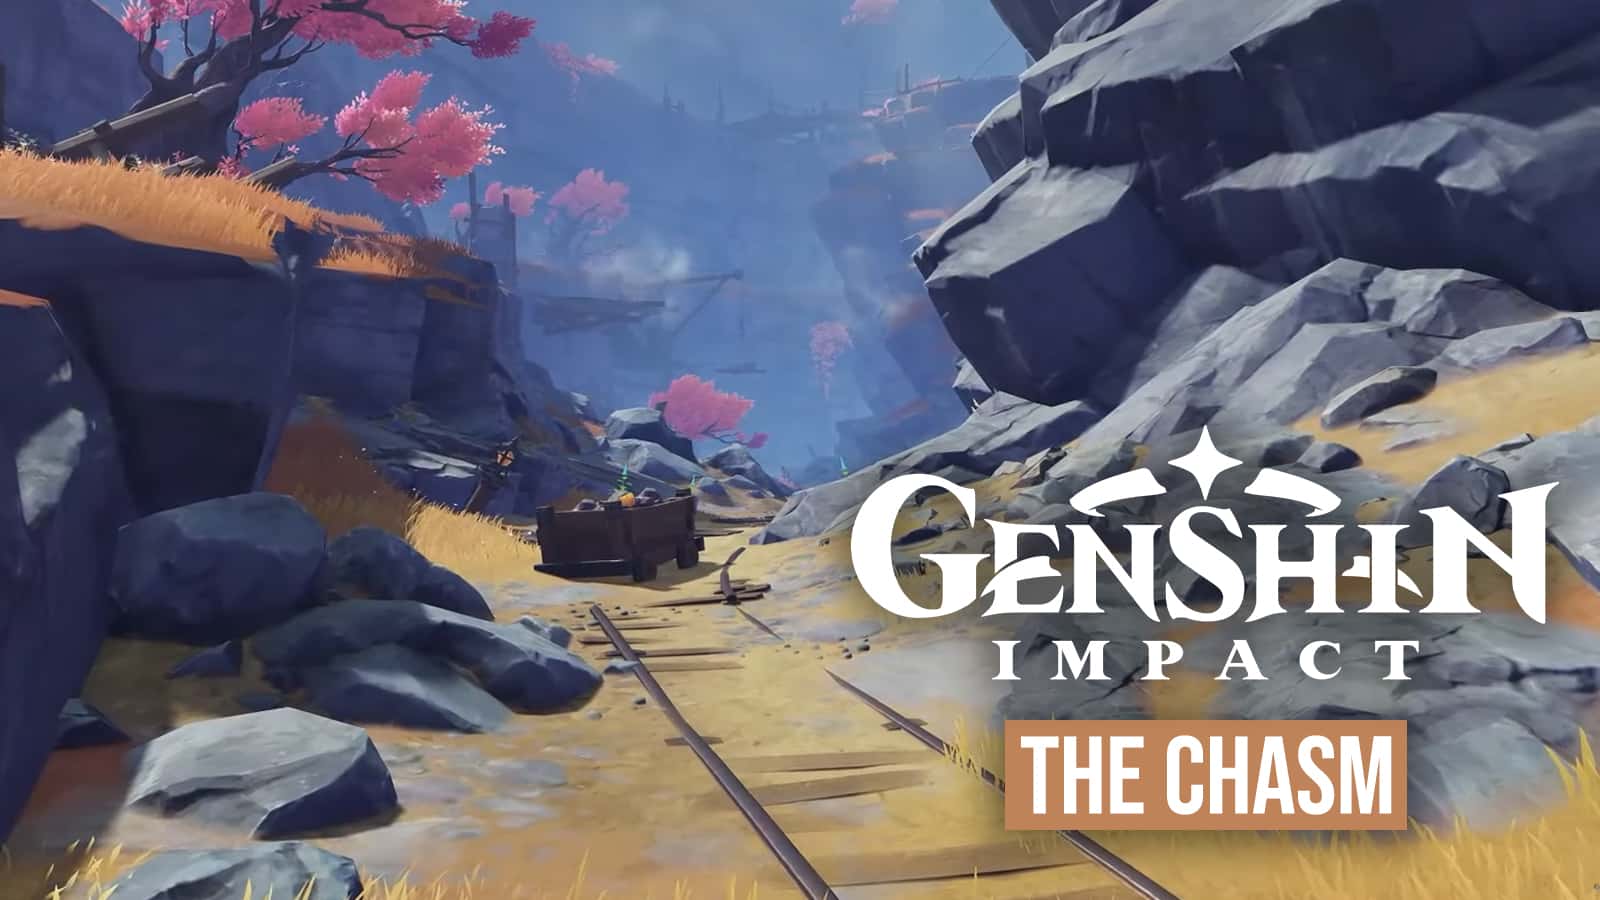 The Chasm in Genshin Impact